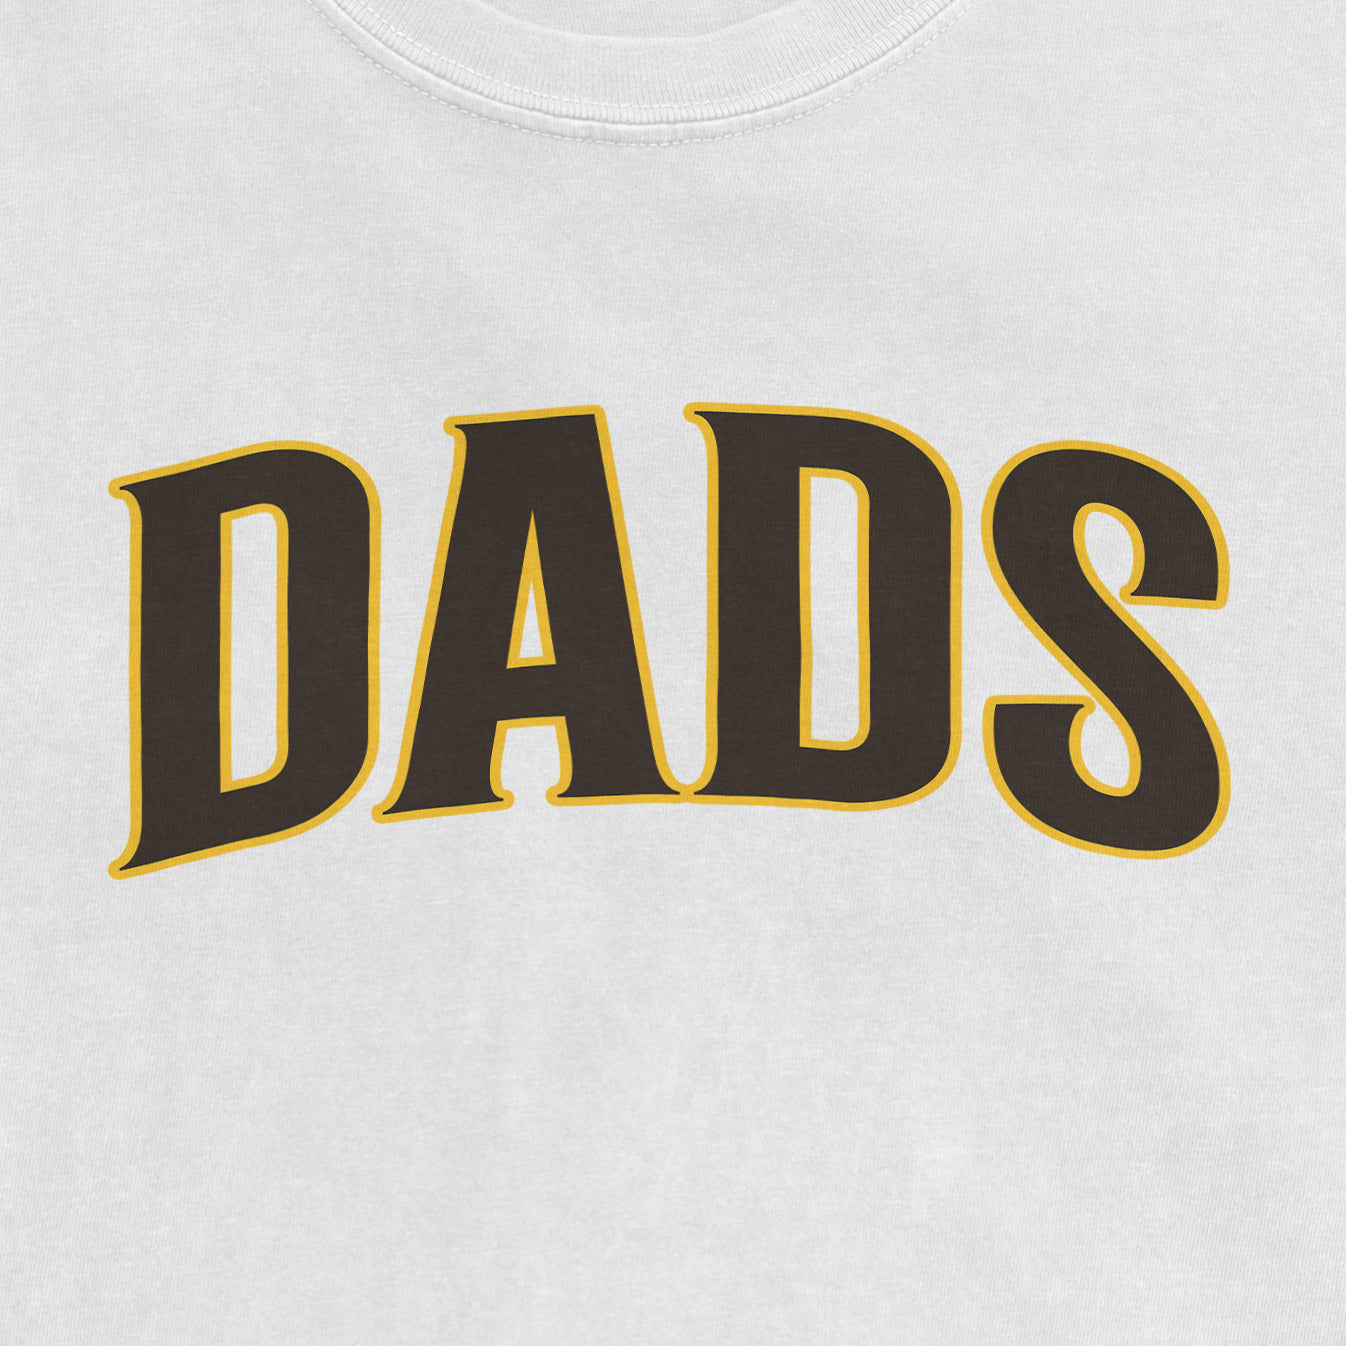 SD DADS | Comfort Colors vintage tee